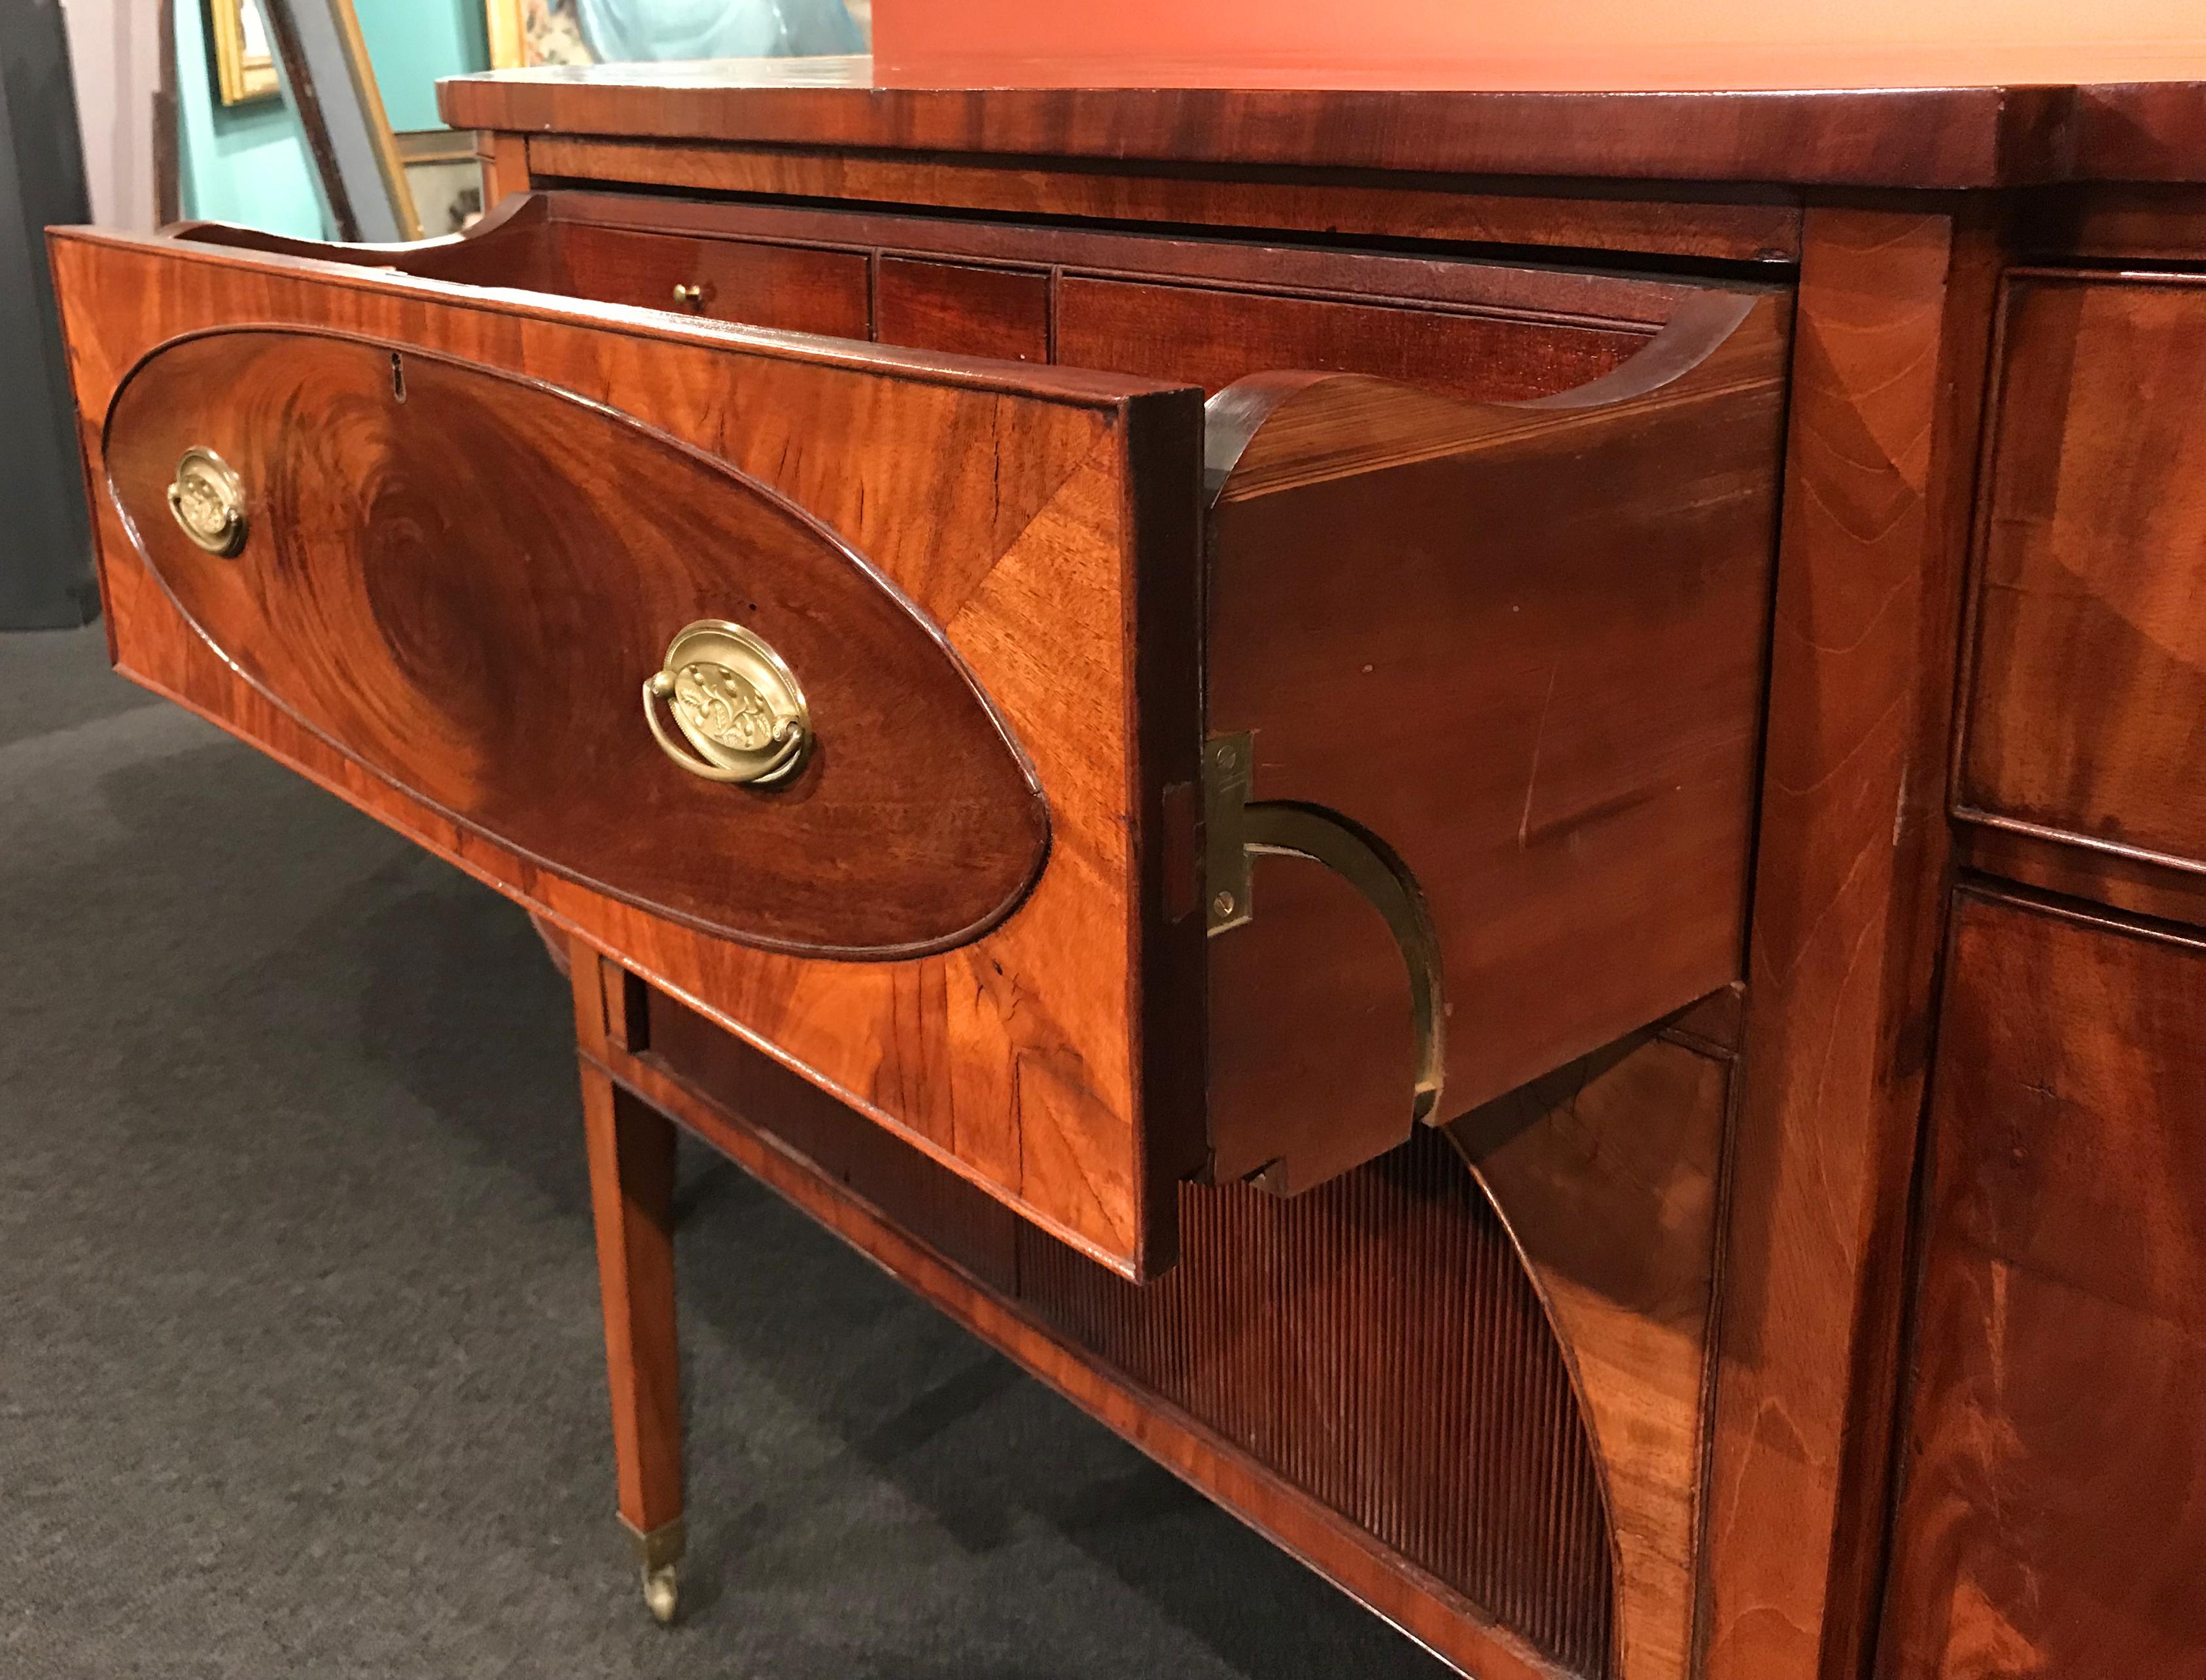 English 19th Century Demilune Mahogany Sideboard /Desk owned by Nathaniel Silsbee 